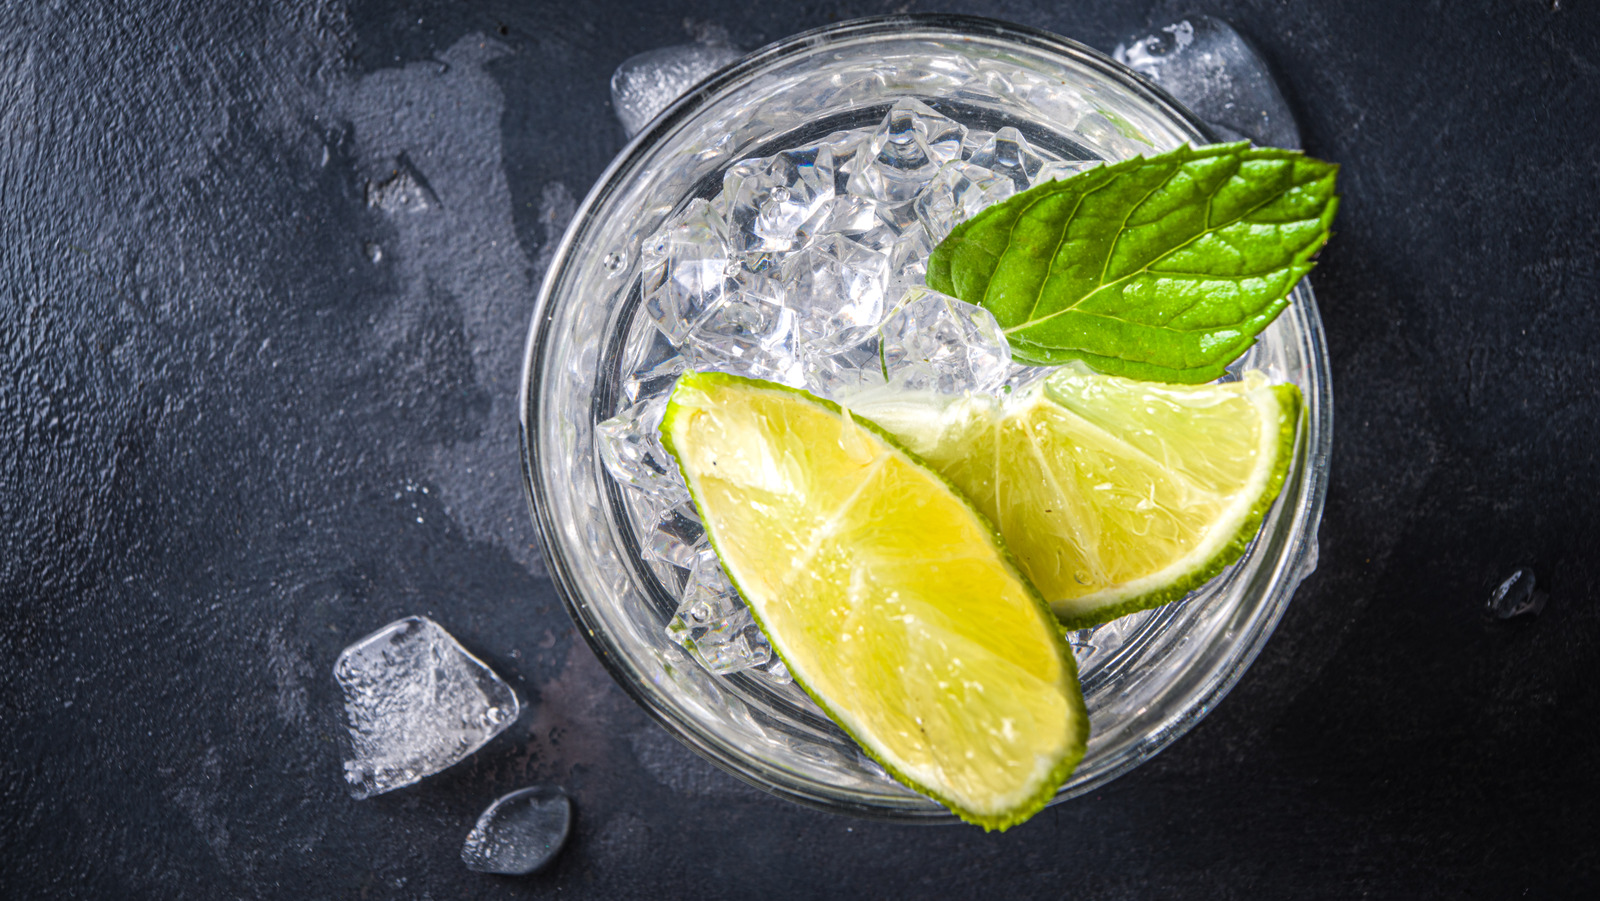 12-best-drinks-to-mix-with-vodka-ranked